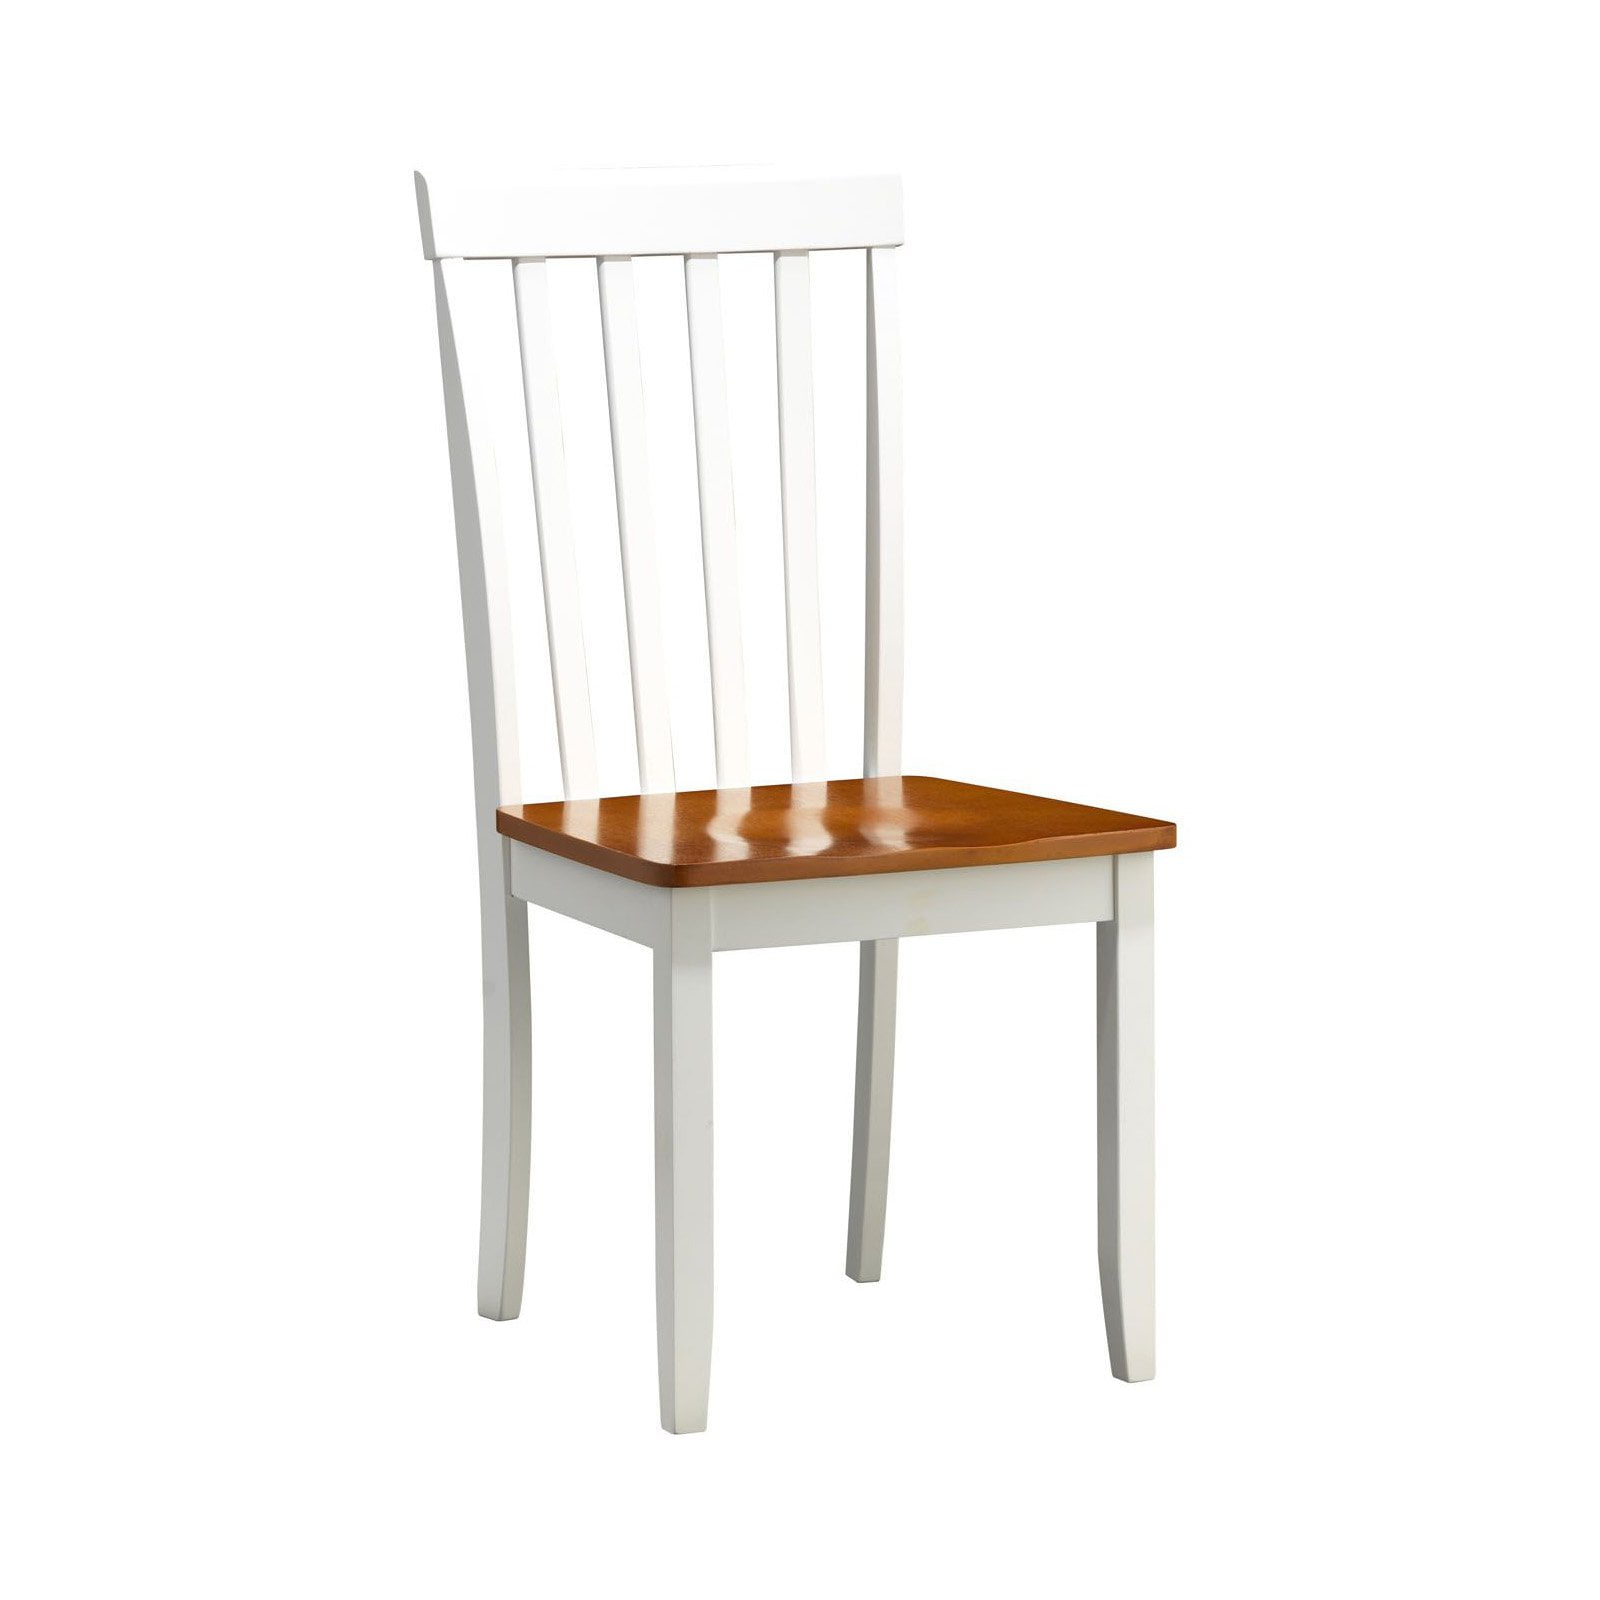 Boraam Bloomington Dining Chair Set, Honey Oak Dining Room Table And Chairs White